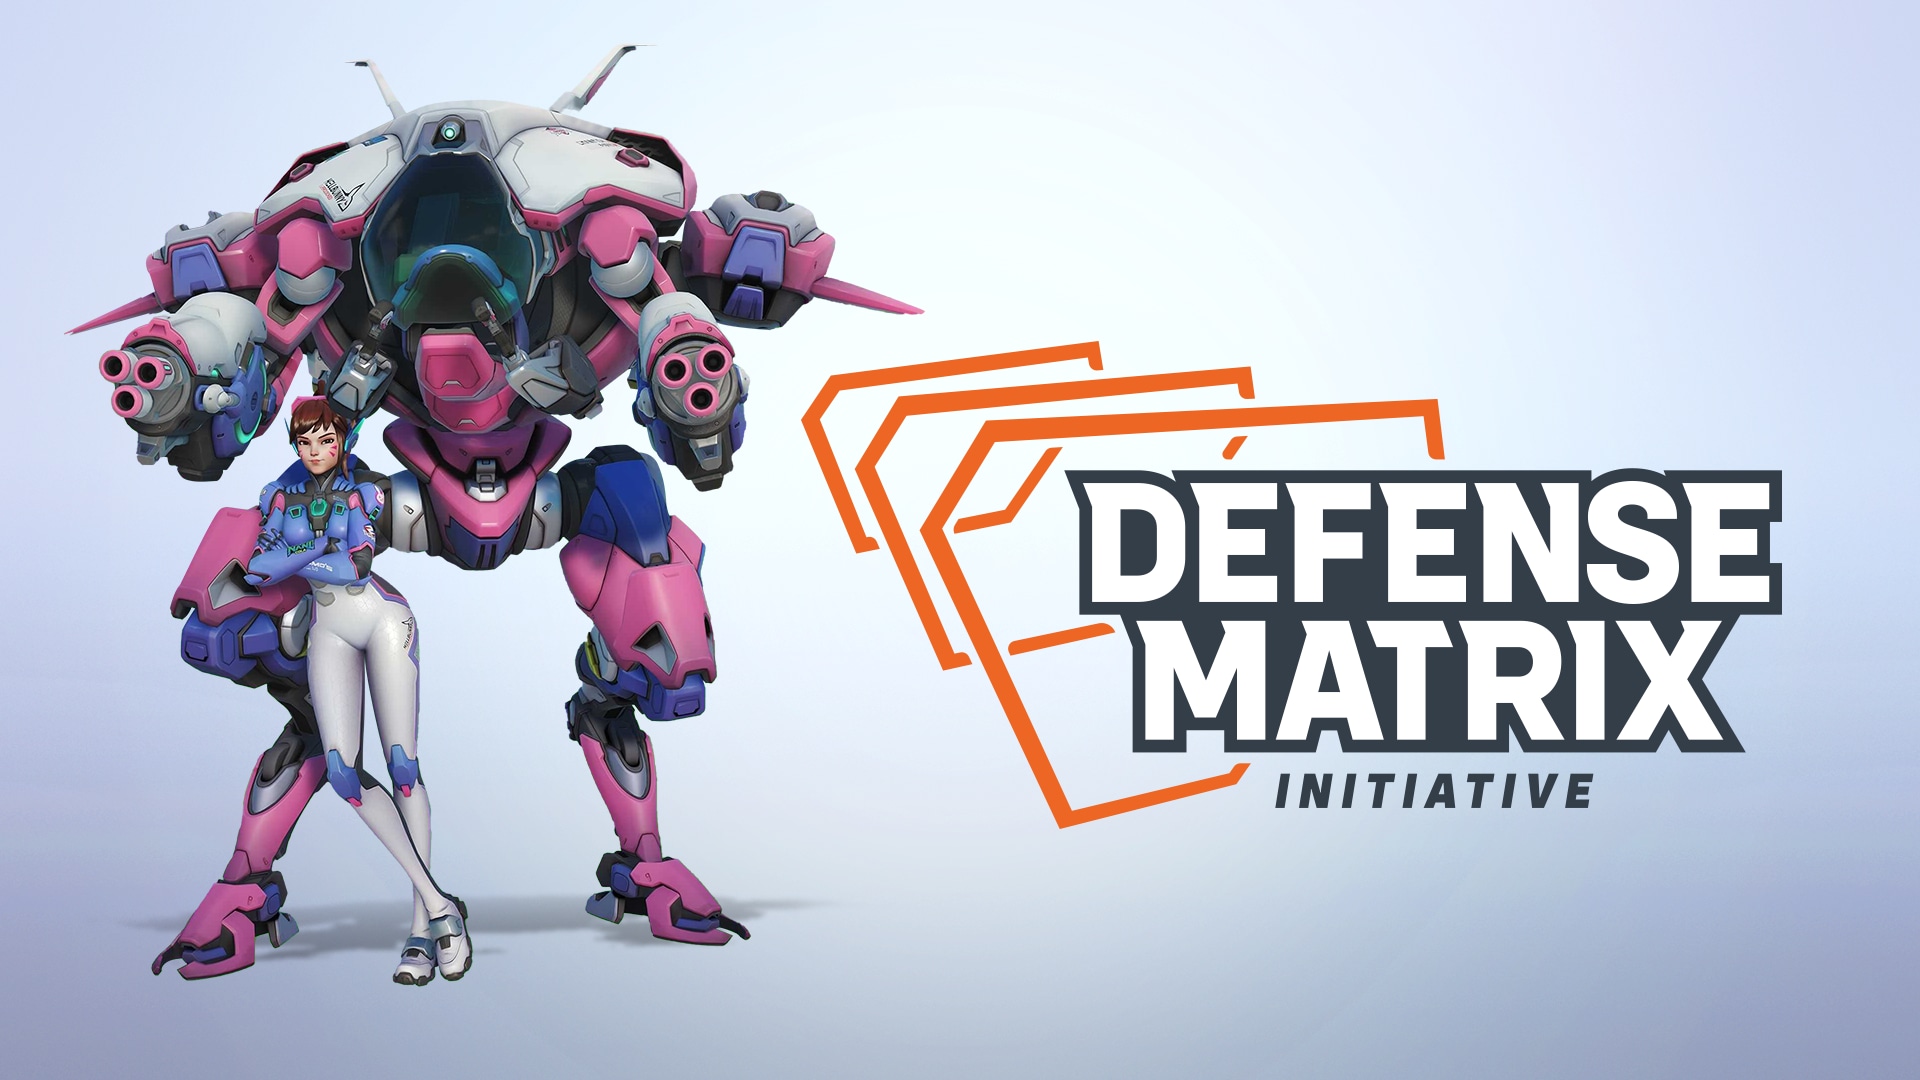 Defense Matrix activated! Fortifying gameplay integrity and positivity in Overwatch 2